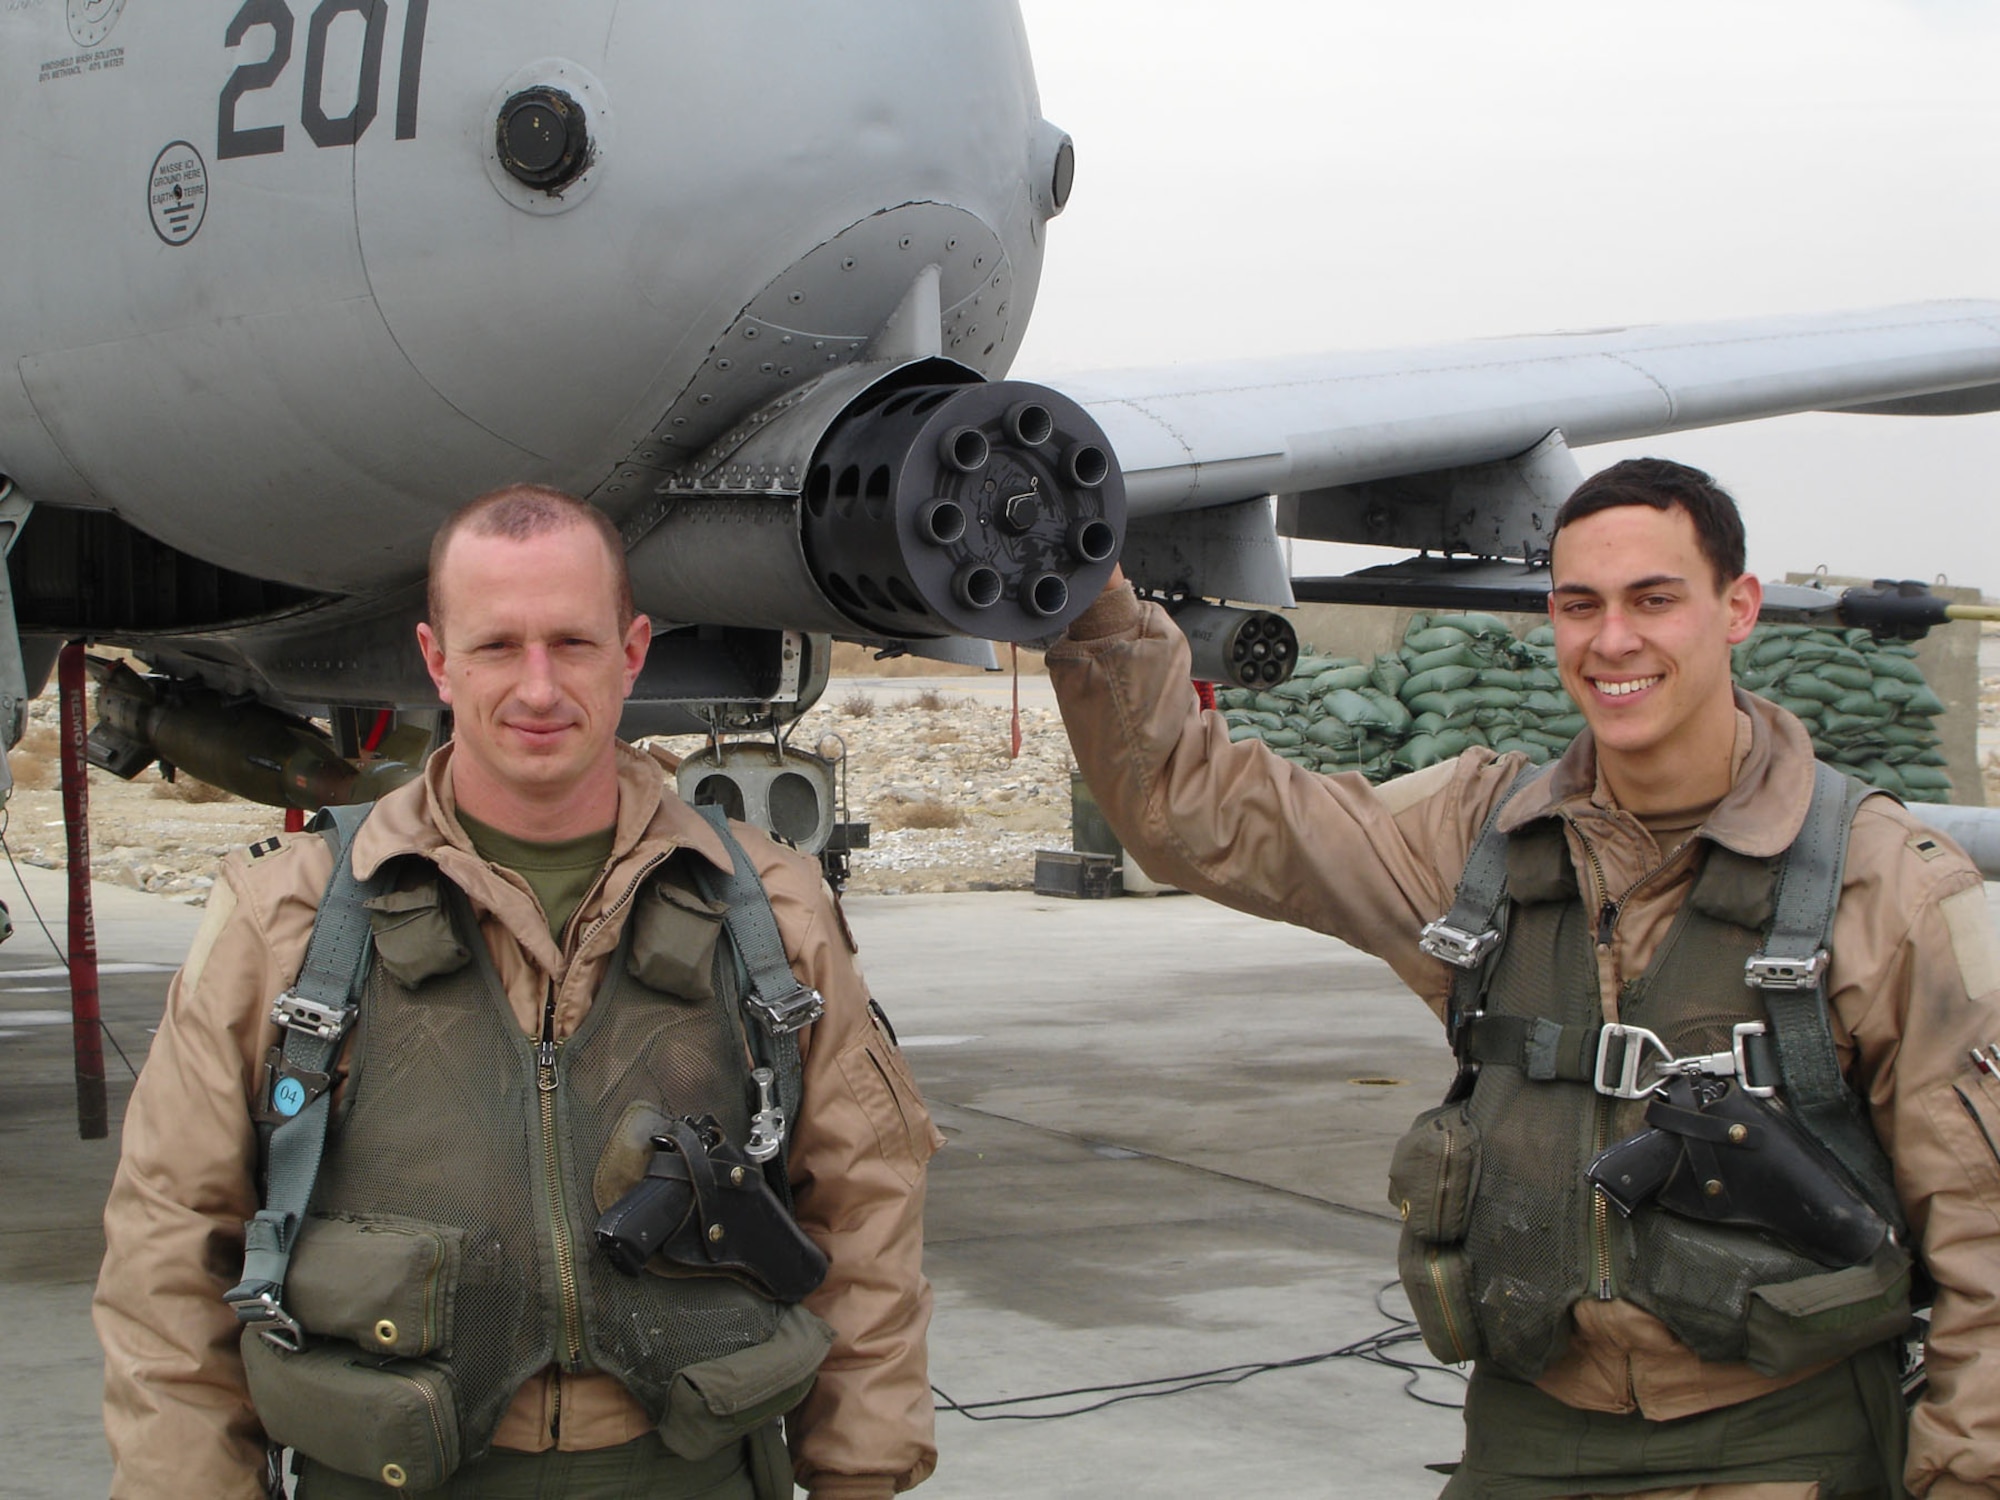 Maj. Steve Raspet (left) and his wingman 1st Lt. Andrew Tenebaum the day after the June 12 mission. (U.S. Air Force photo)